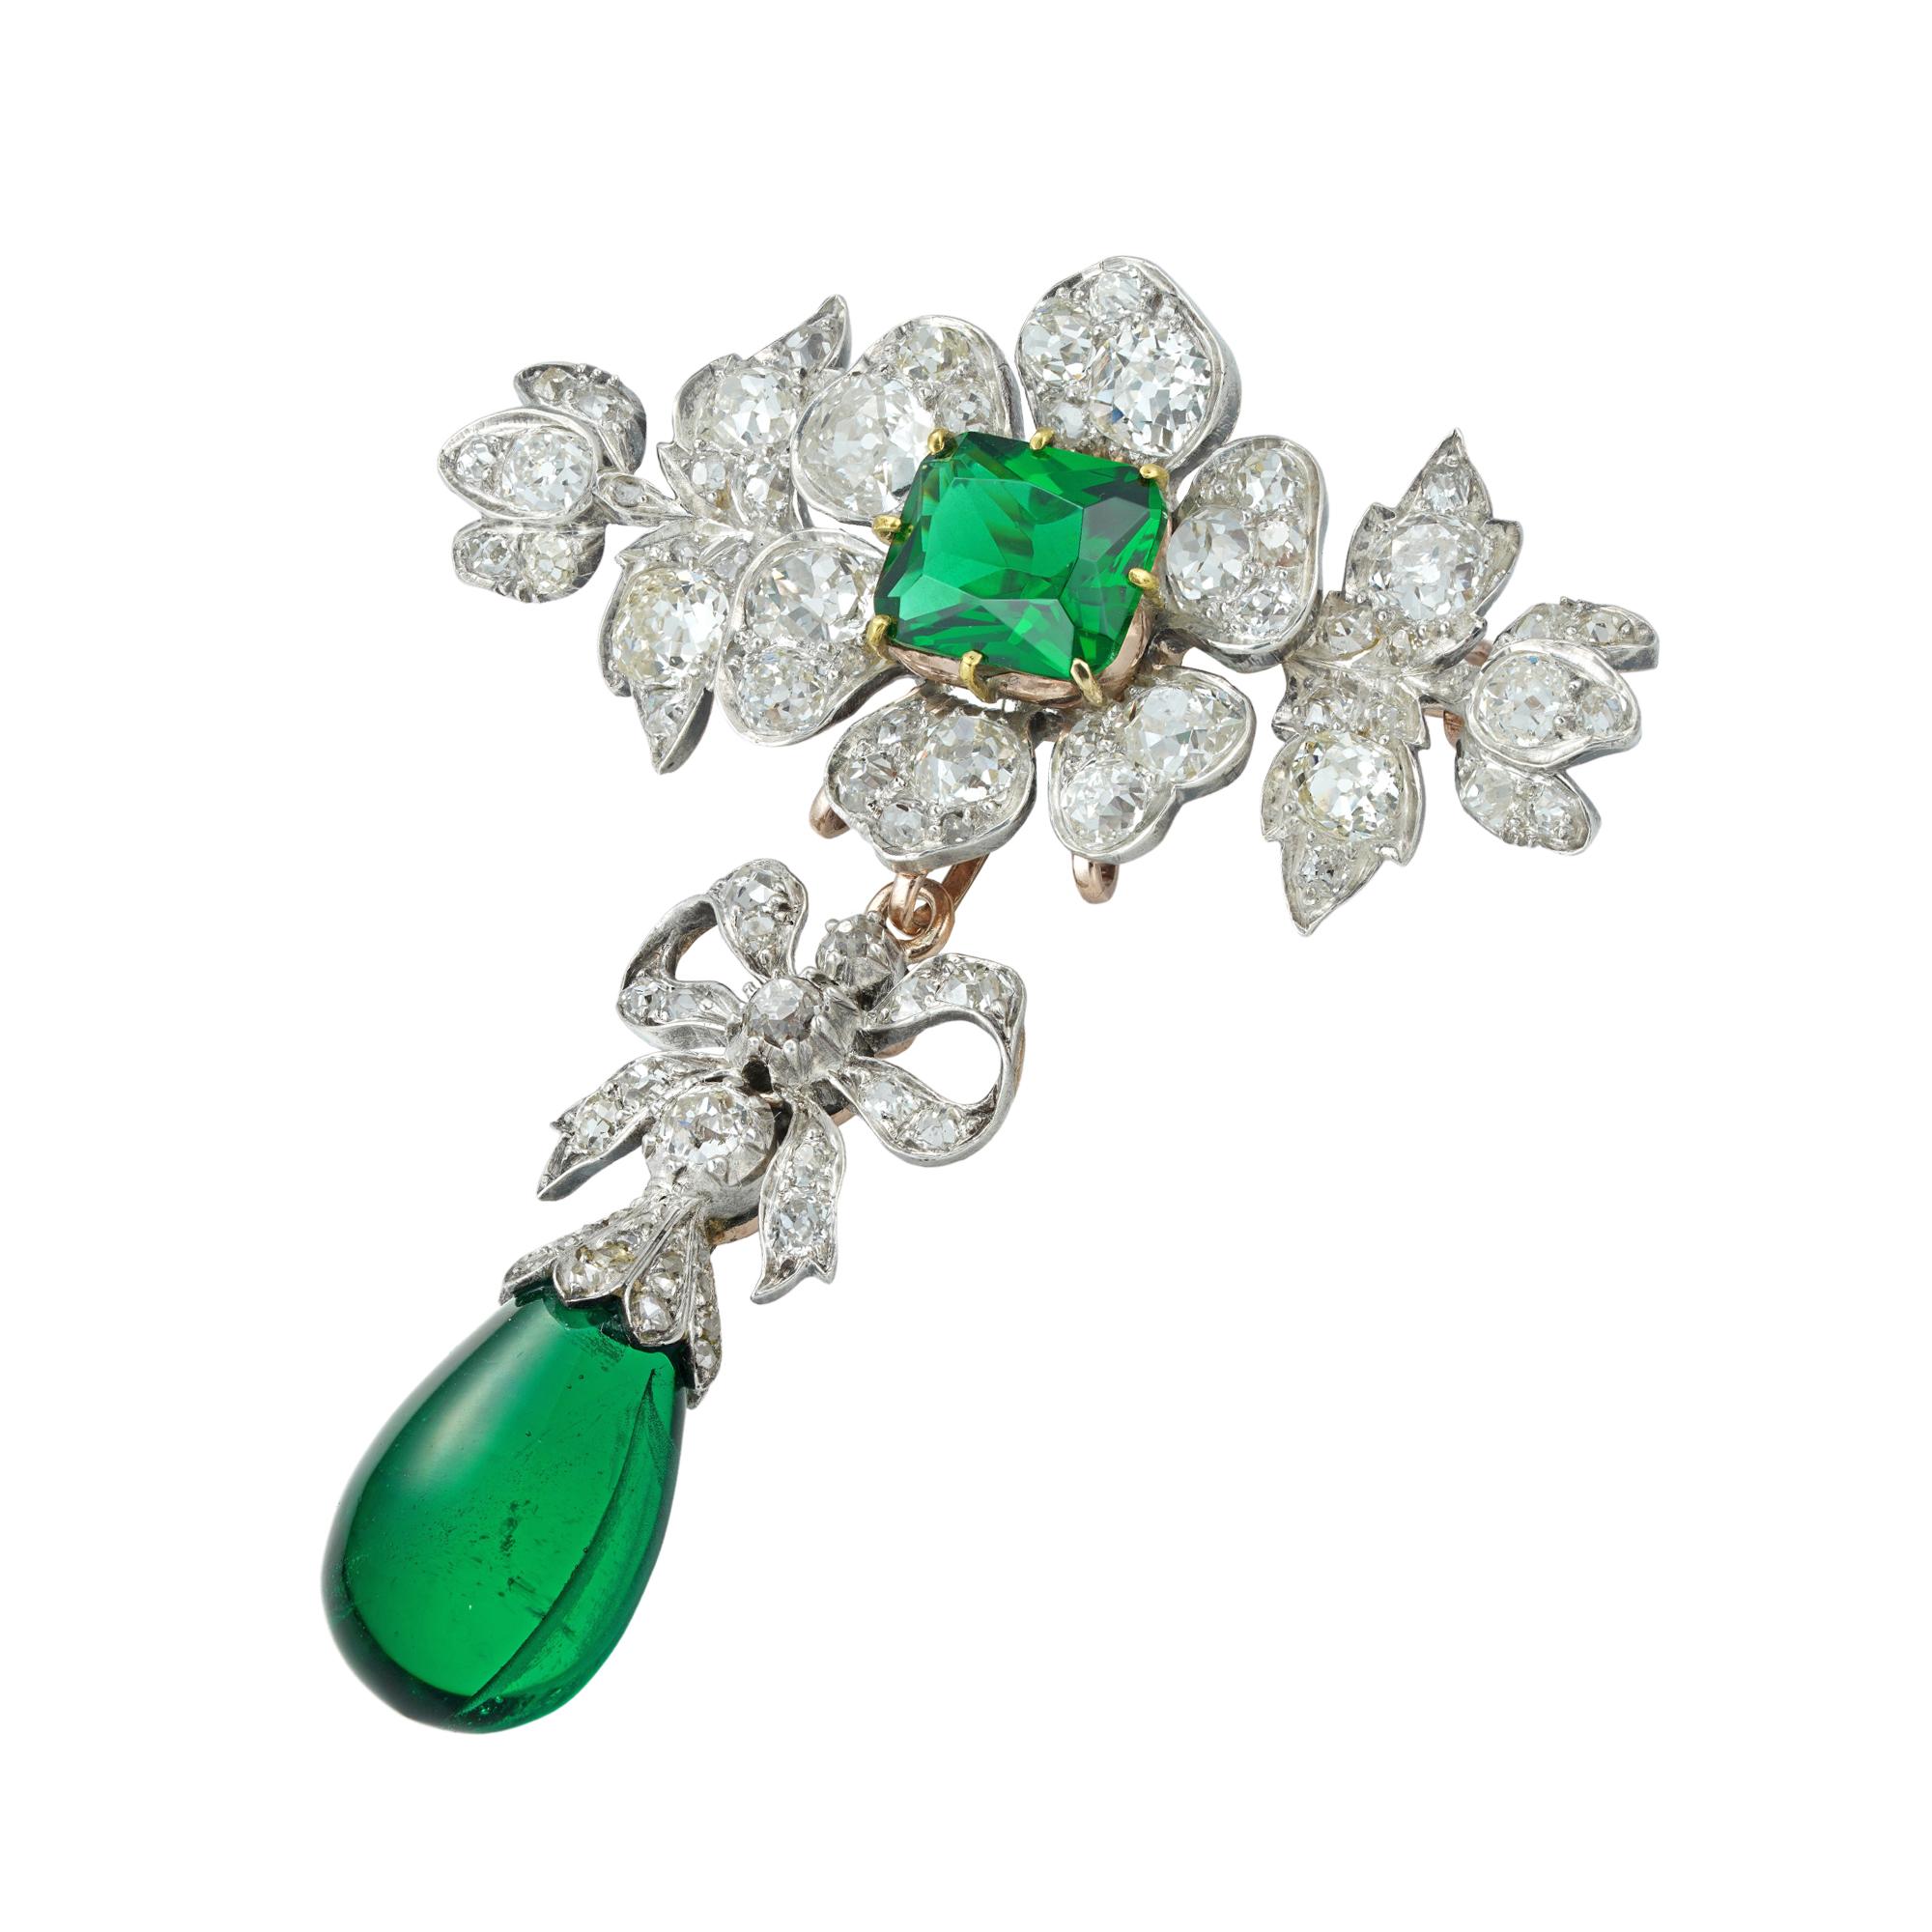 A Victorian diamond and green-paste brooch, the brooch in the form of a flower with a cushion-shaped green paste to the centre surrounded by six petals set with old European-cut diamonds, within diamond-set foliate decorations, suspending a